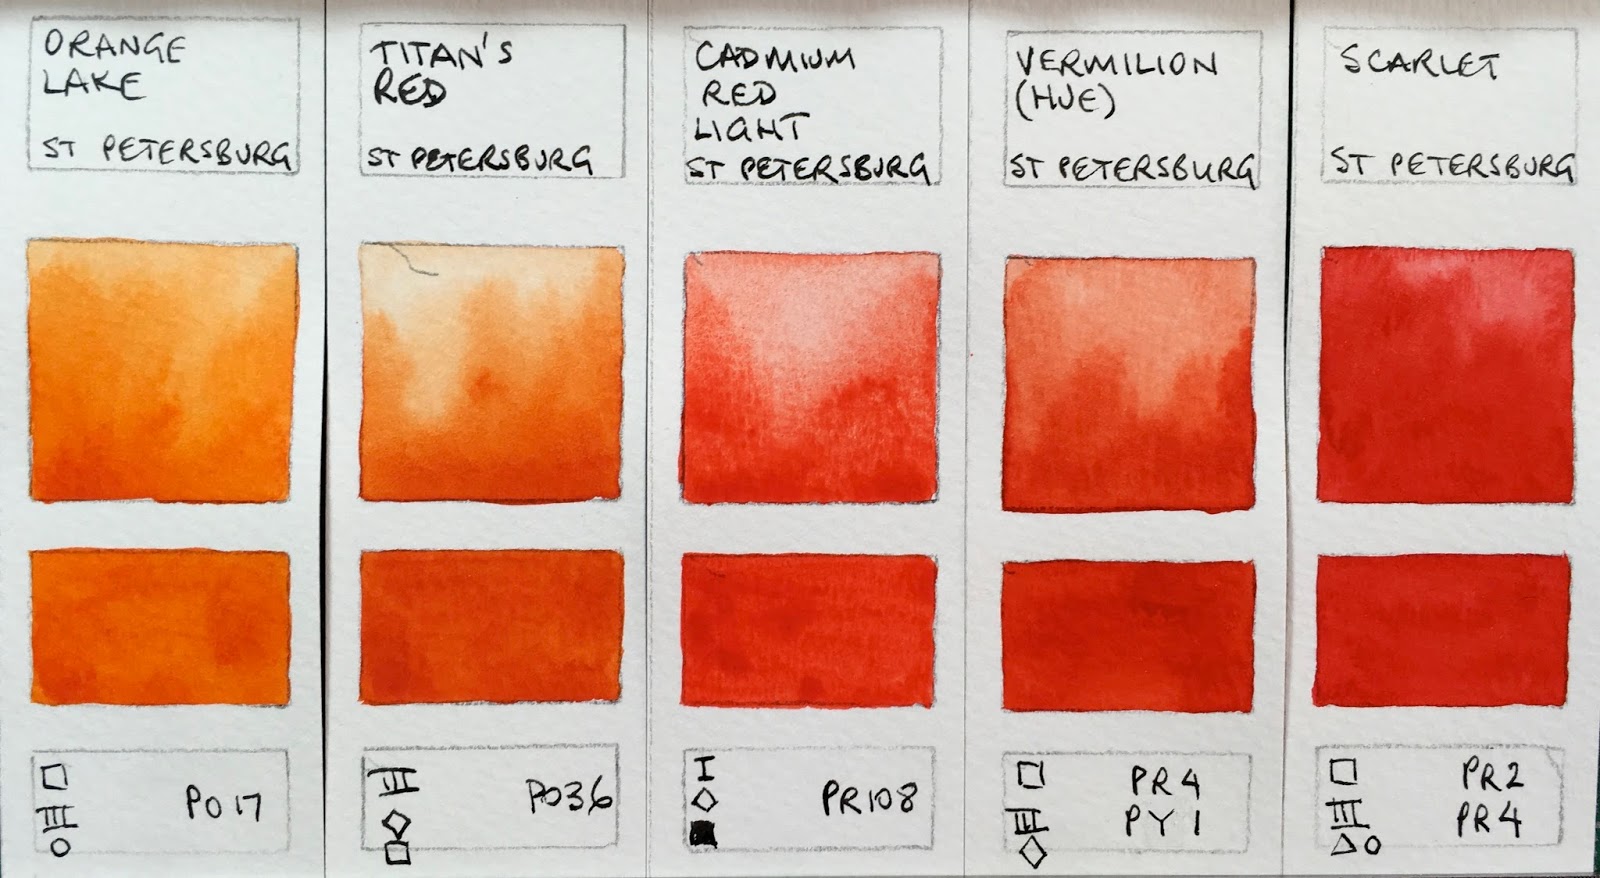 LIGHTFAST TEST + WHITE NIGHTS Watercolor Review VS YARKA St